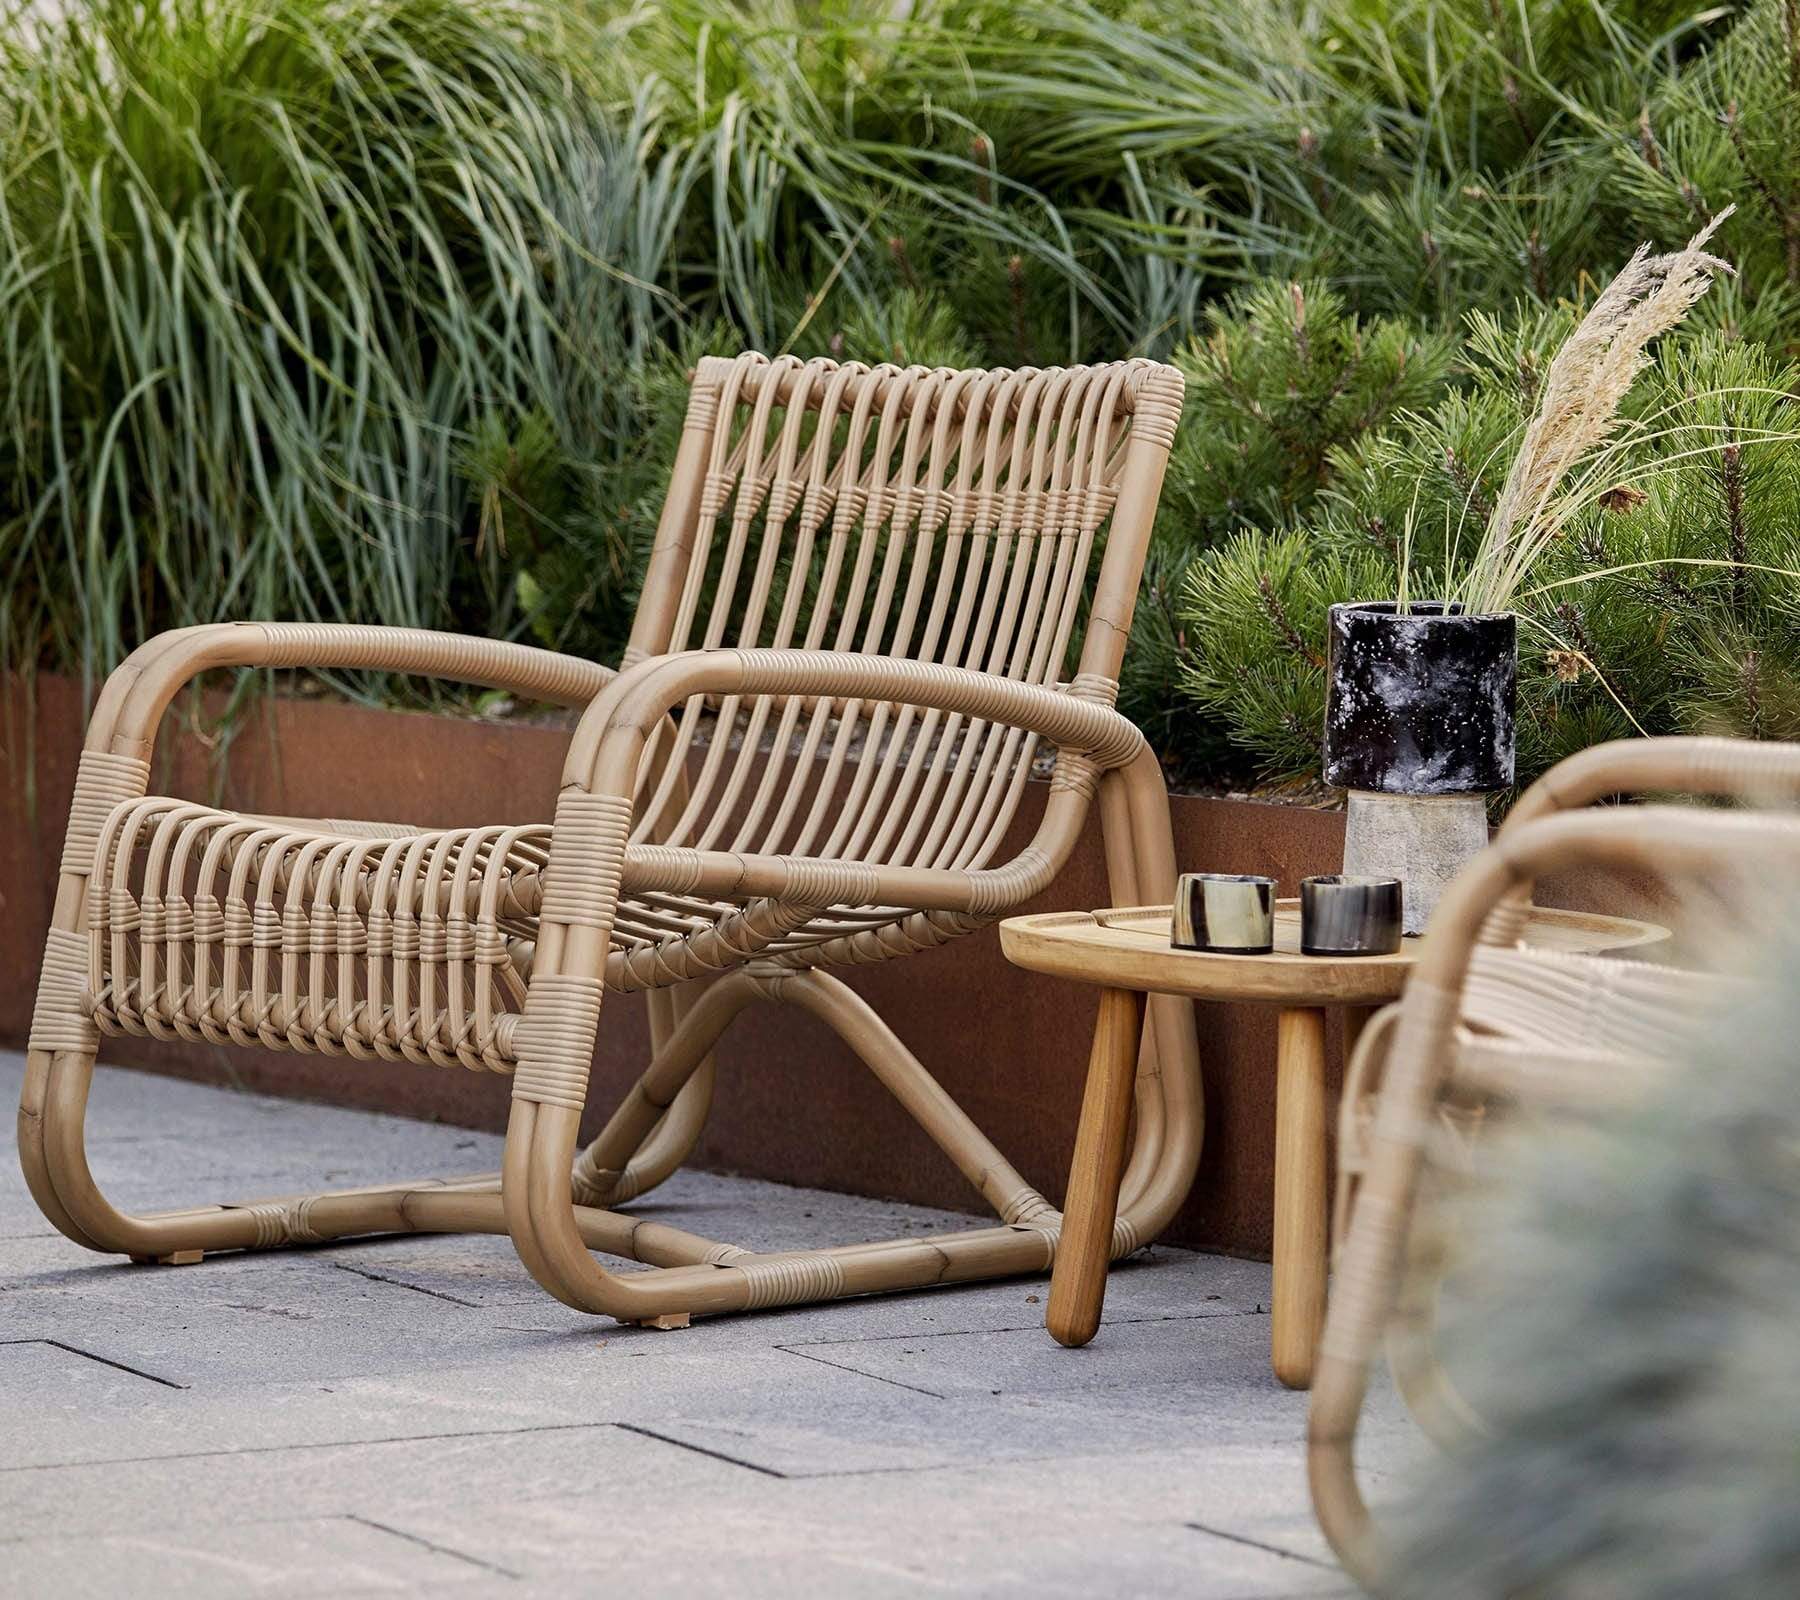 Cane-Line Denmark Outdoor Chairs Cane-Line Curve lounge chair OUTDOOR